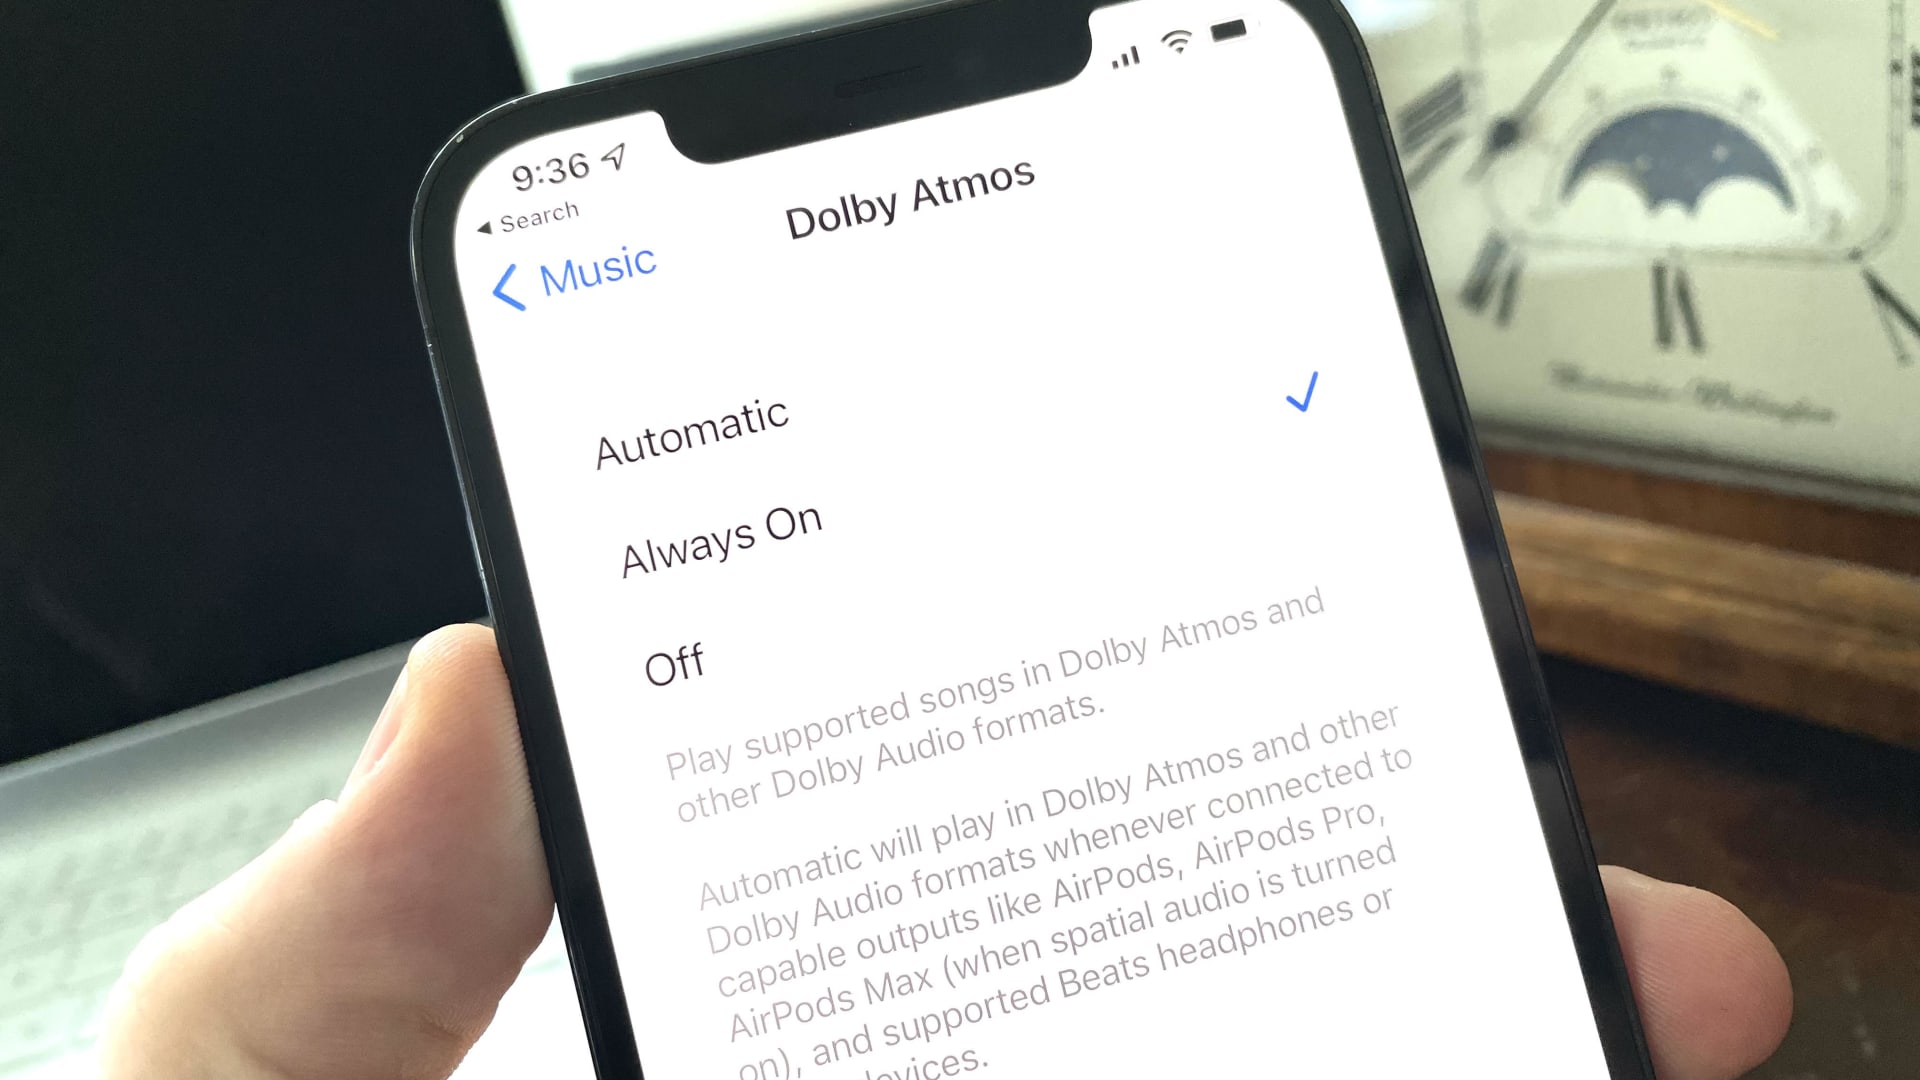 Apple Music with Dolby Atmos spatial audio